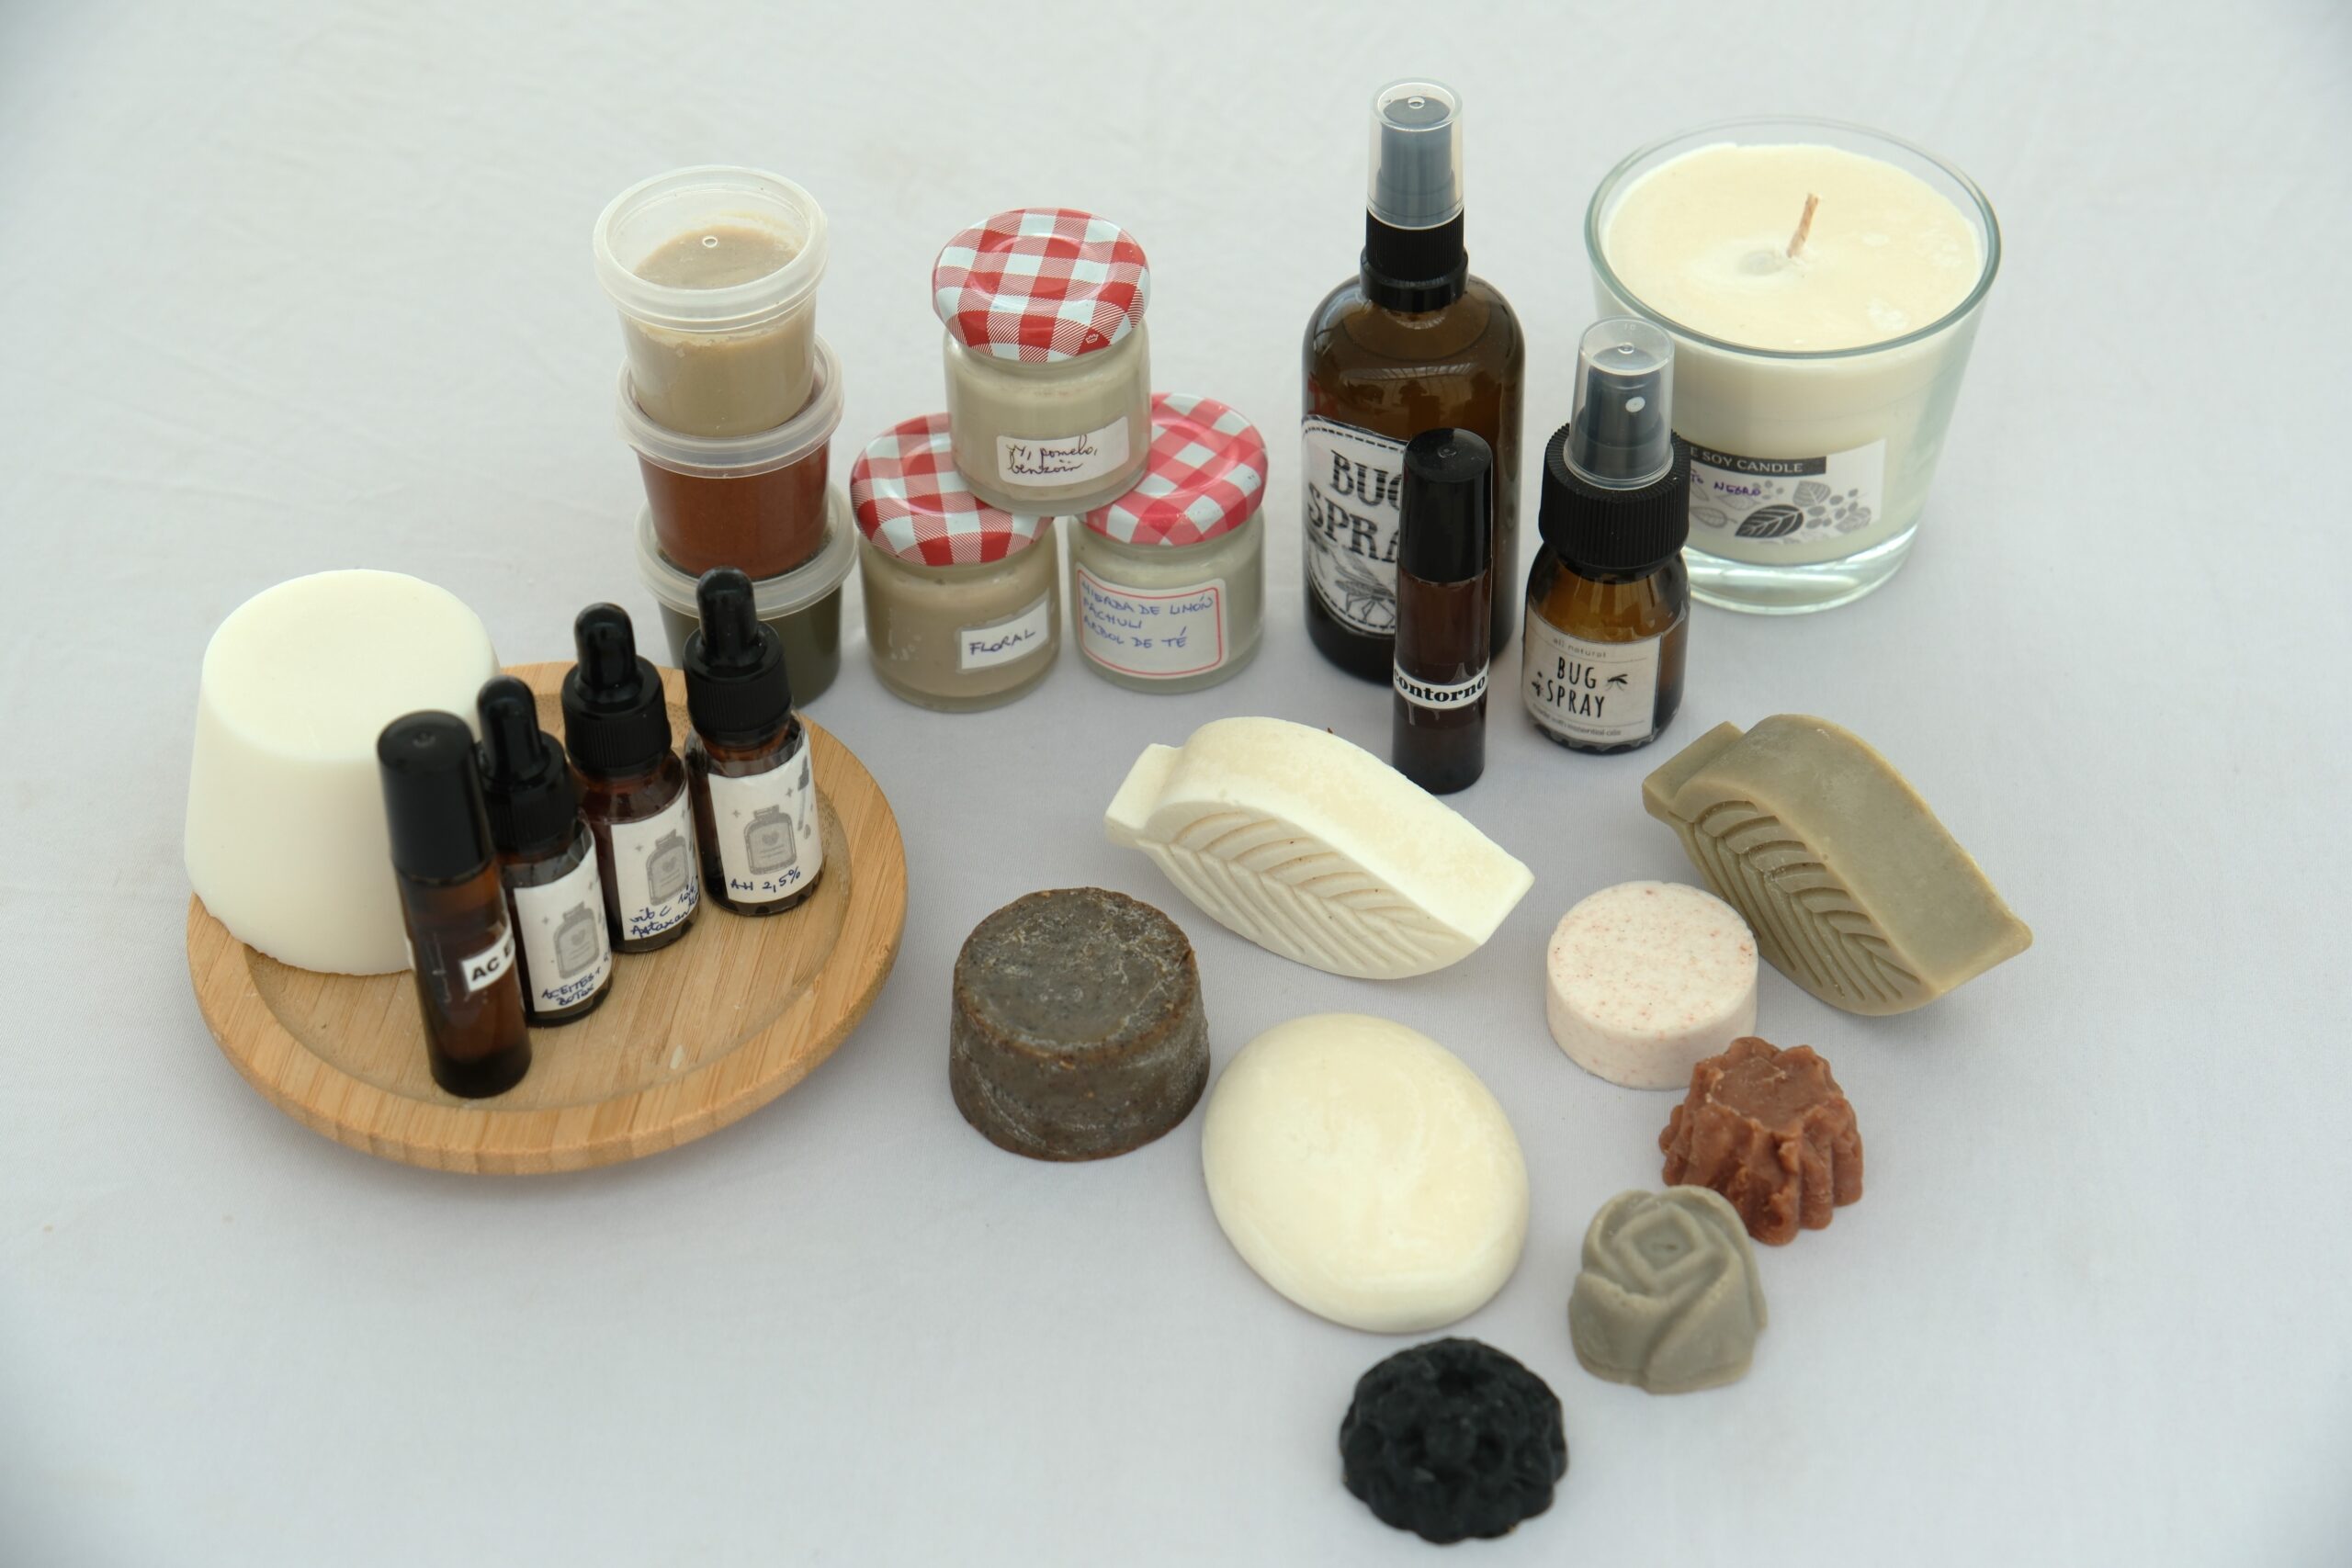 Artisanal, Ecological and Natural Products – Mia and Walter